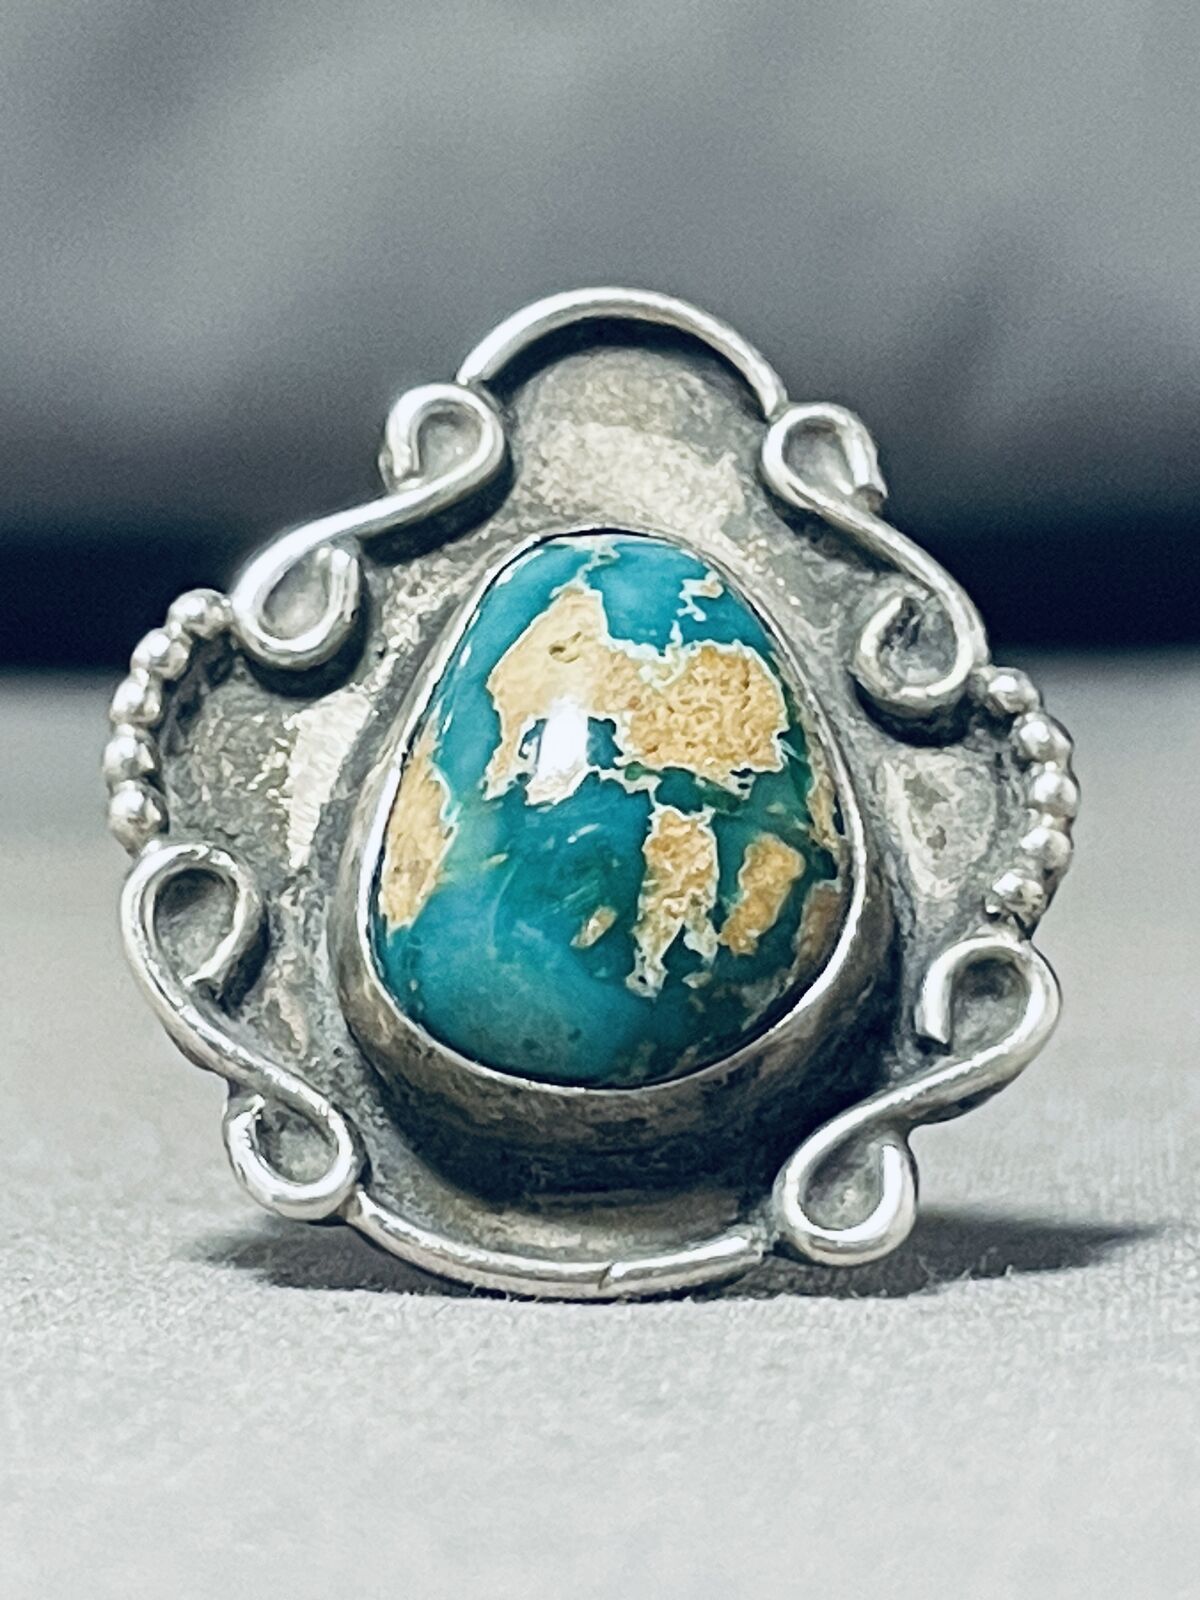 VERY EARLY ROYSTON TURQUOISE VINTAGE NAVAJO STERLING SILVER RING